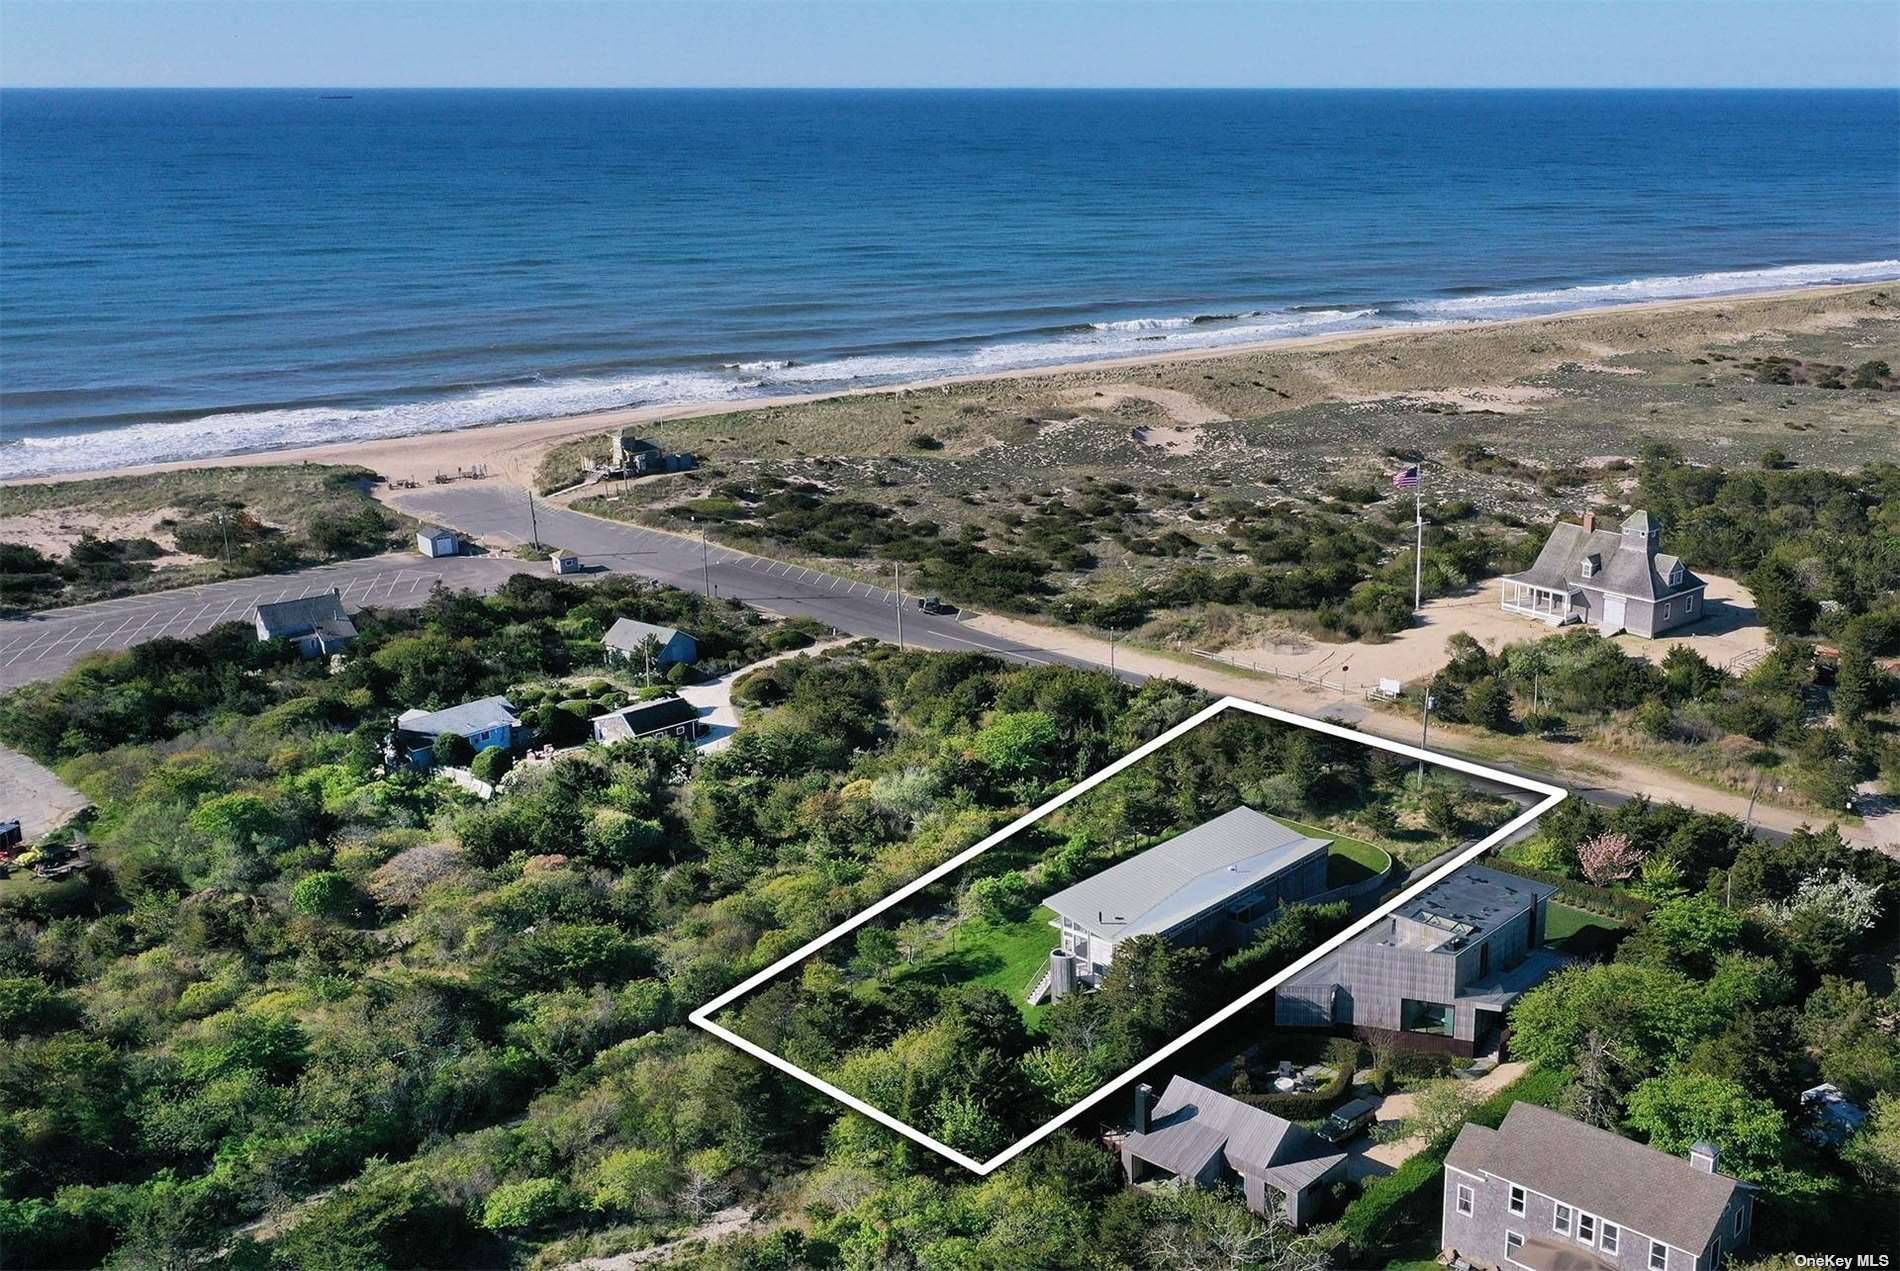 Recently refreshed and updated with a new chef's kitchen, this Modern Beach Cottage is located only 3 houses from the Atlantic Ocean in Amagansett and was designed by award winning ...